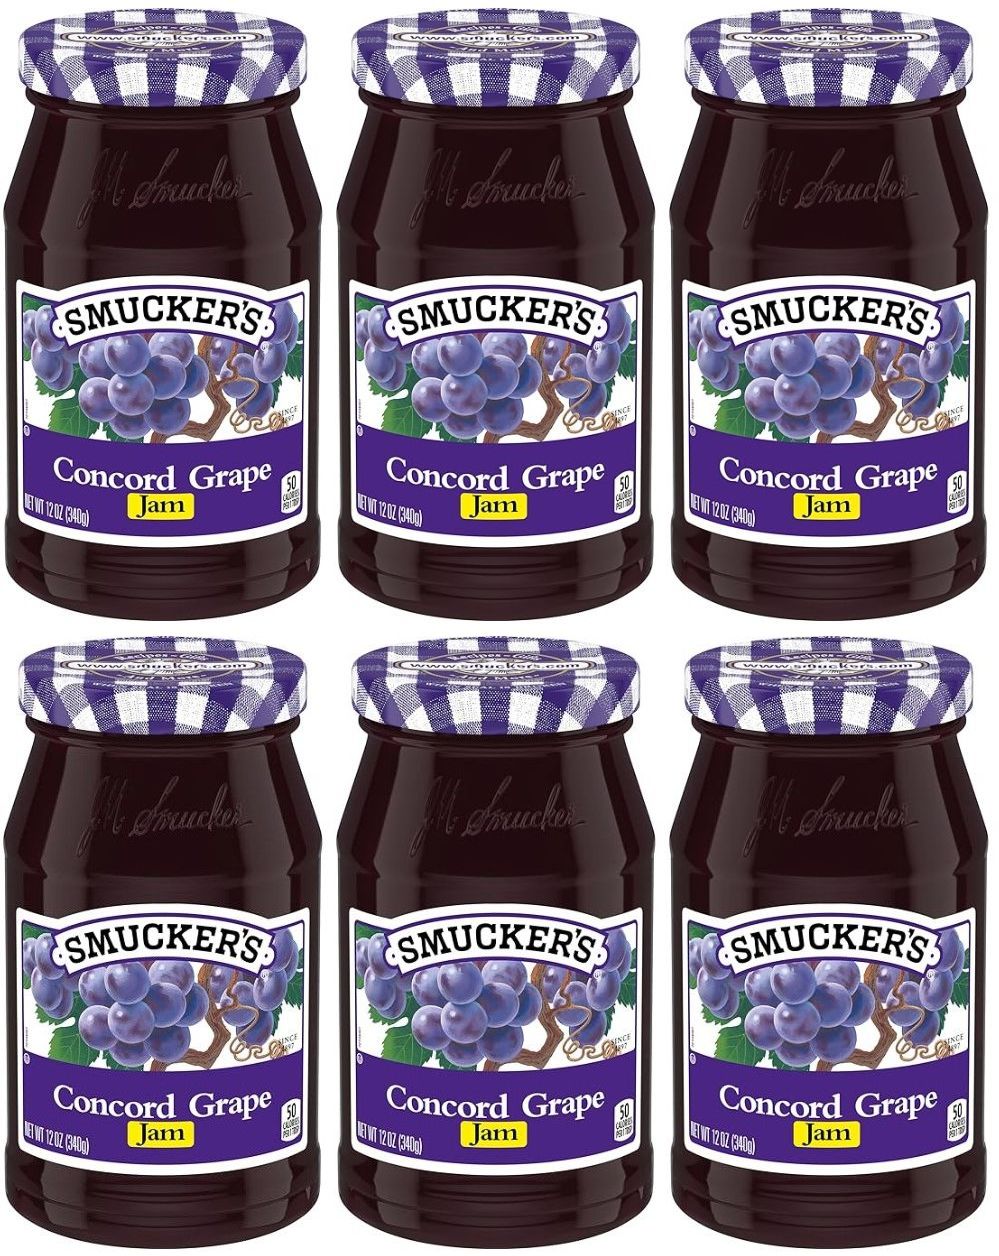 Smucker's 6-Pack 12-Oz Jars: Concord Grape Jam or Orange Marmalade $12.60 & More w/ S&S + Free Shipping w/ Prime or $35+ $12.55